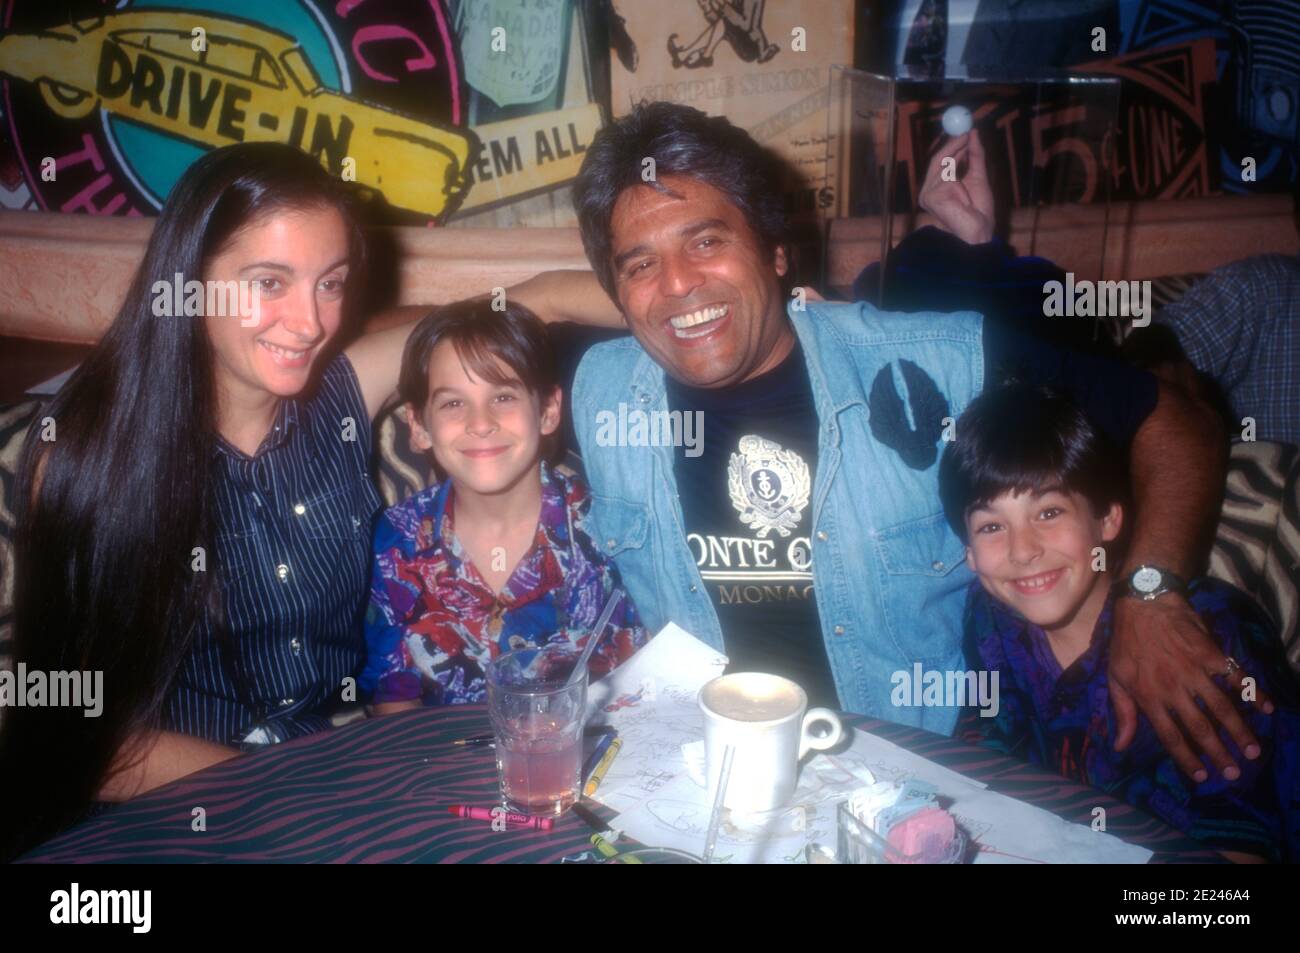 Beverly Hills, California, USA 1st May 1996 Actor Erik Estrada, wife Nanete Mirkovic and sons Anthony Eric Estrada and Brandon Michael-Paul Estrada attend Malibu Shores Event at Planet Hollywood Beverly Hills on May 1, 1996 in Beverly Hills, California, USA. Photo by Barry King/Alamy Stock Photo Stock Photo